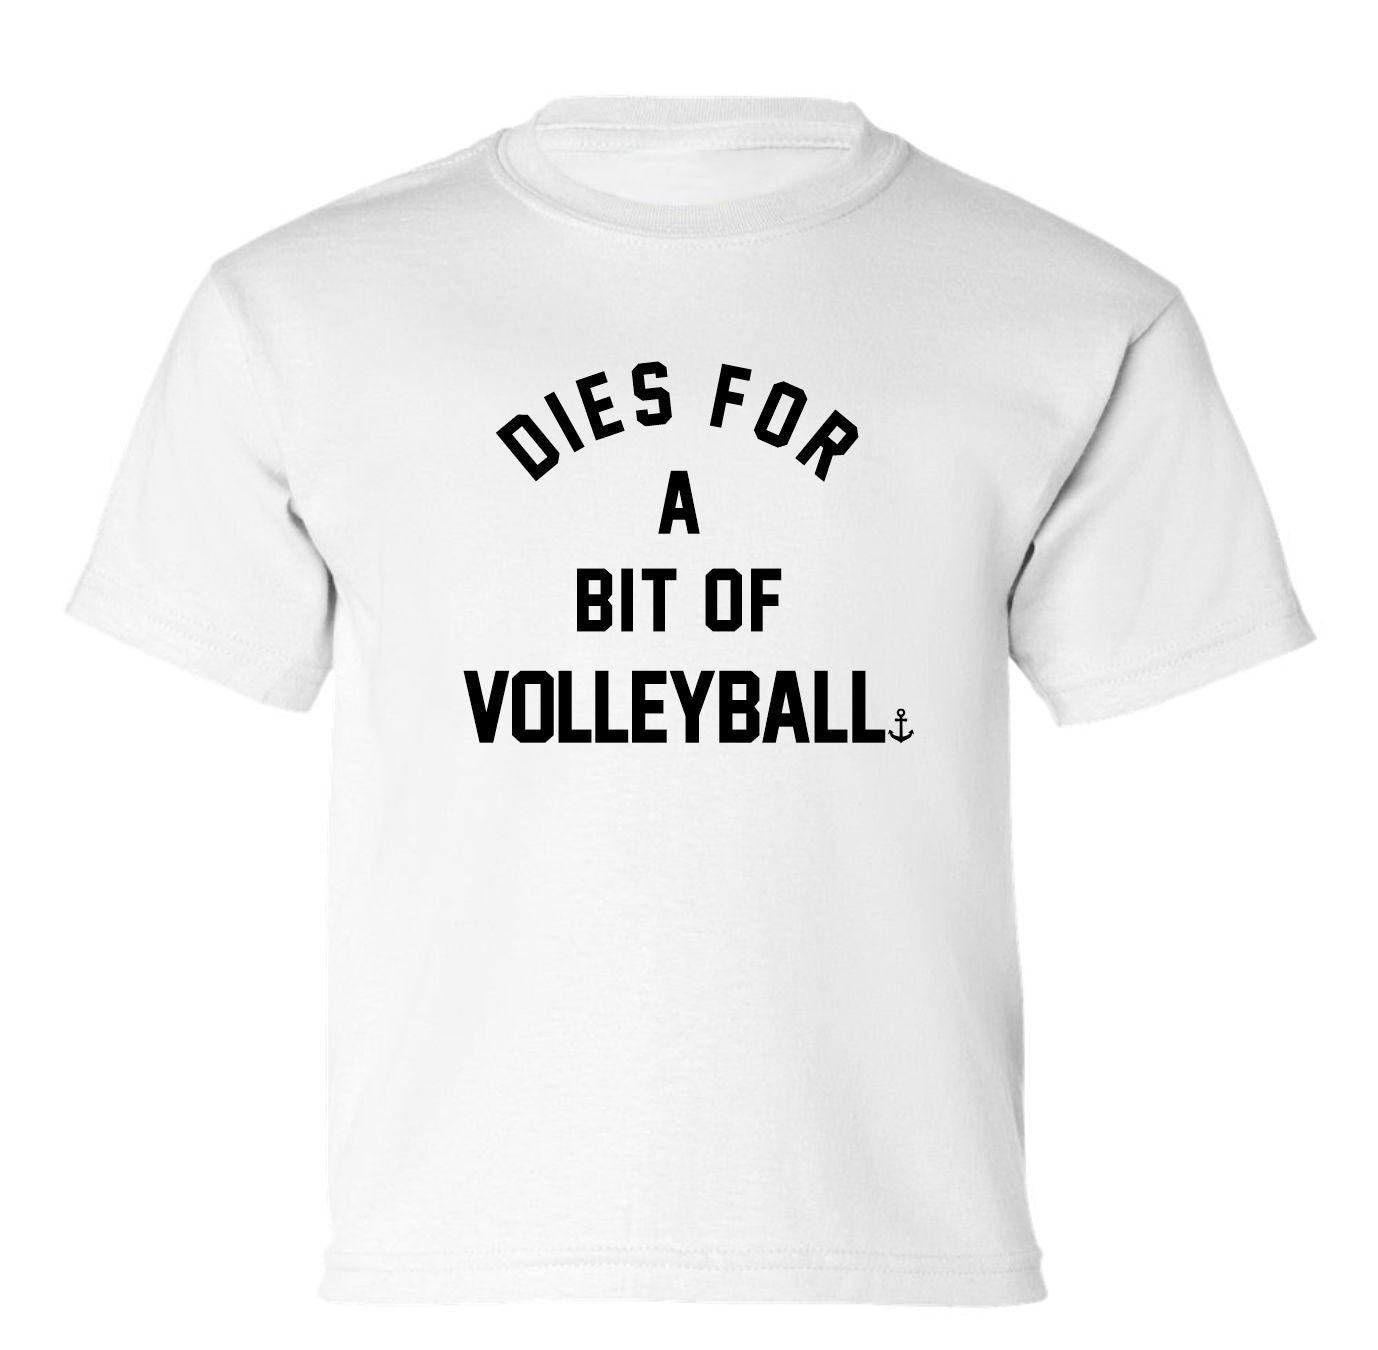 "Dies For A Bit Of Volleyball" Toddler/Youth T-Shirt